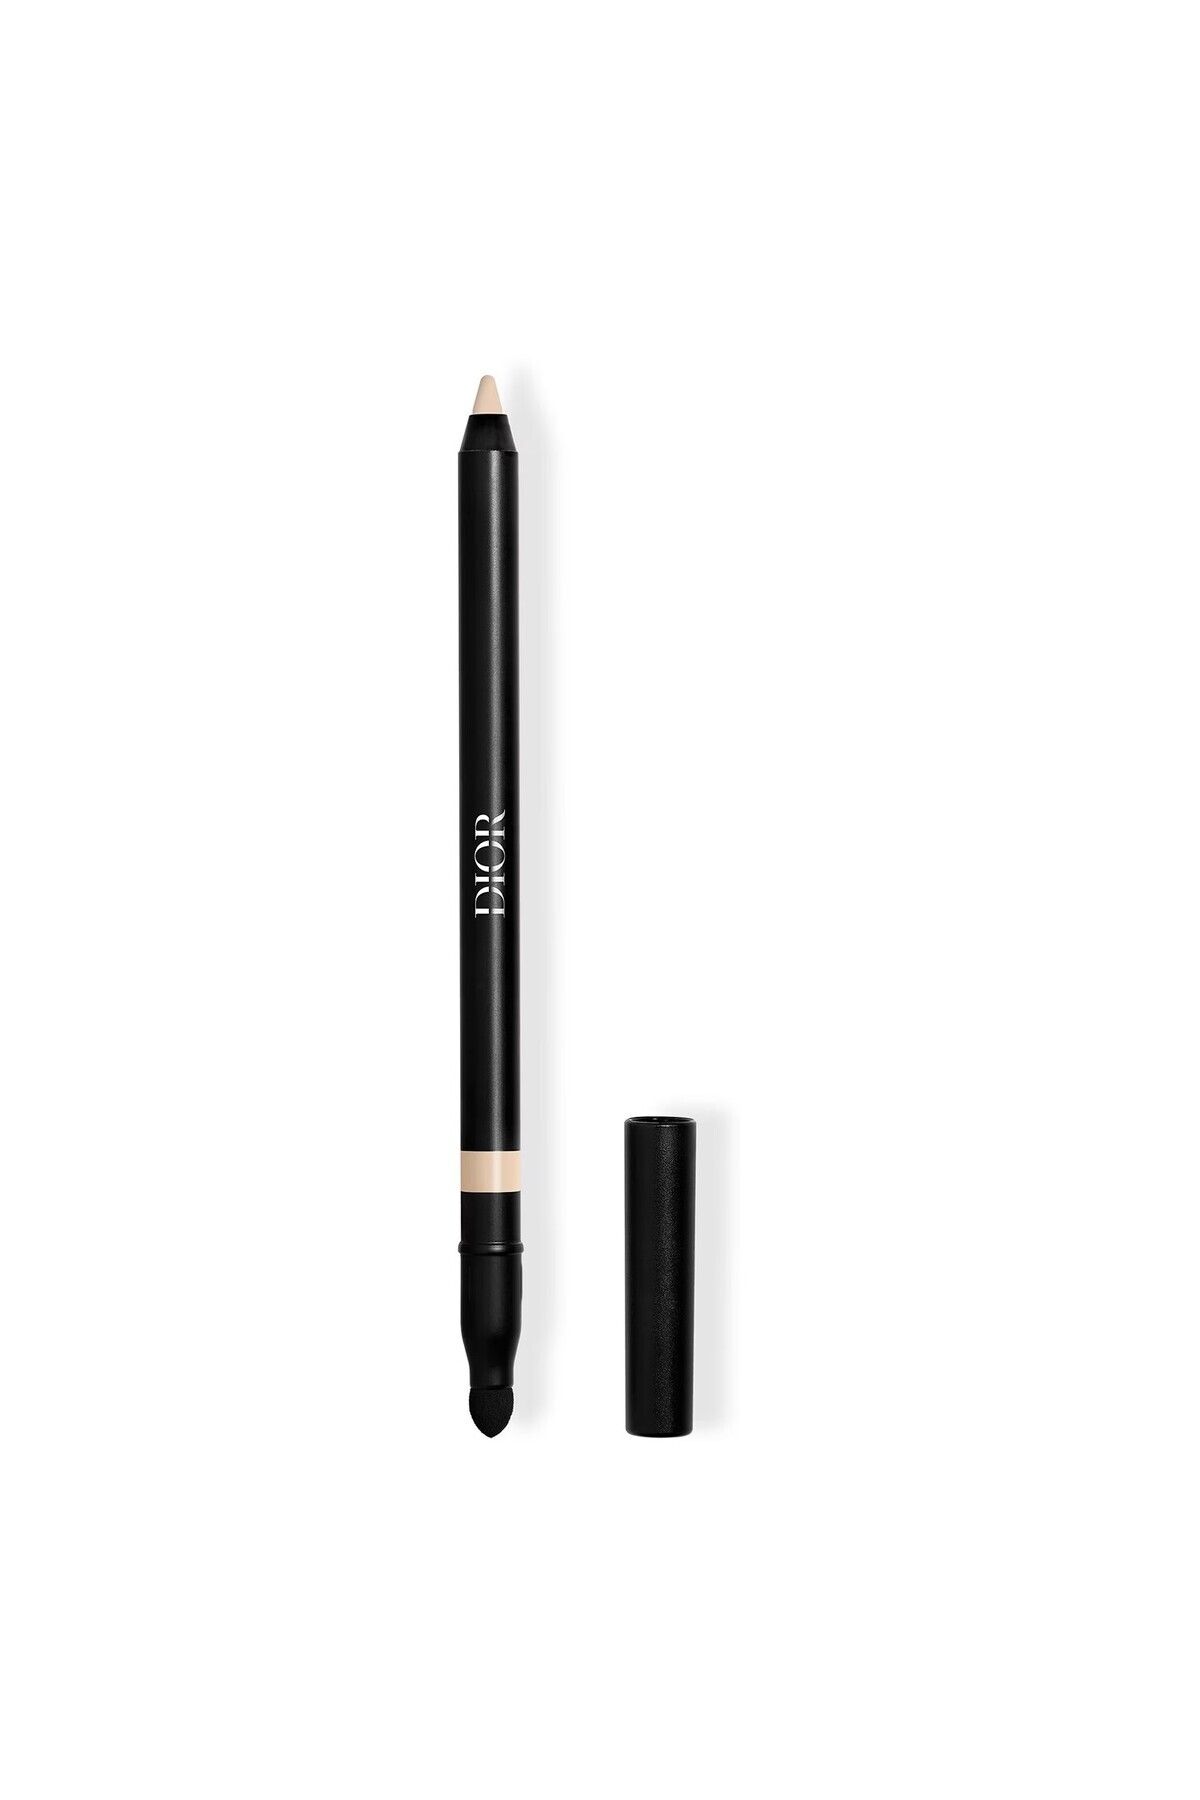 Dior SHOW KOHL-SMEAR-FREE, CLARİTY-FREE WATER-RESİSTANT EYE PENCİL İN CREAMY TEXTURE PSSN2356